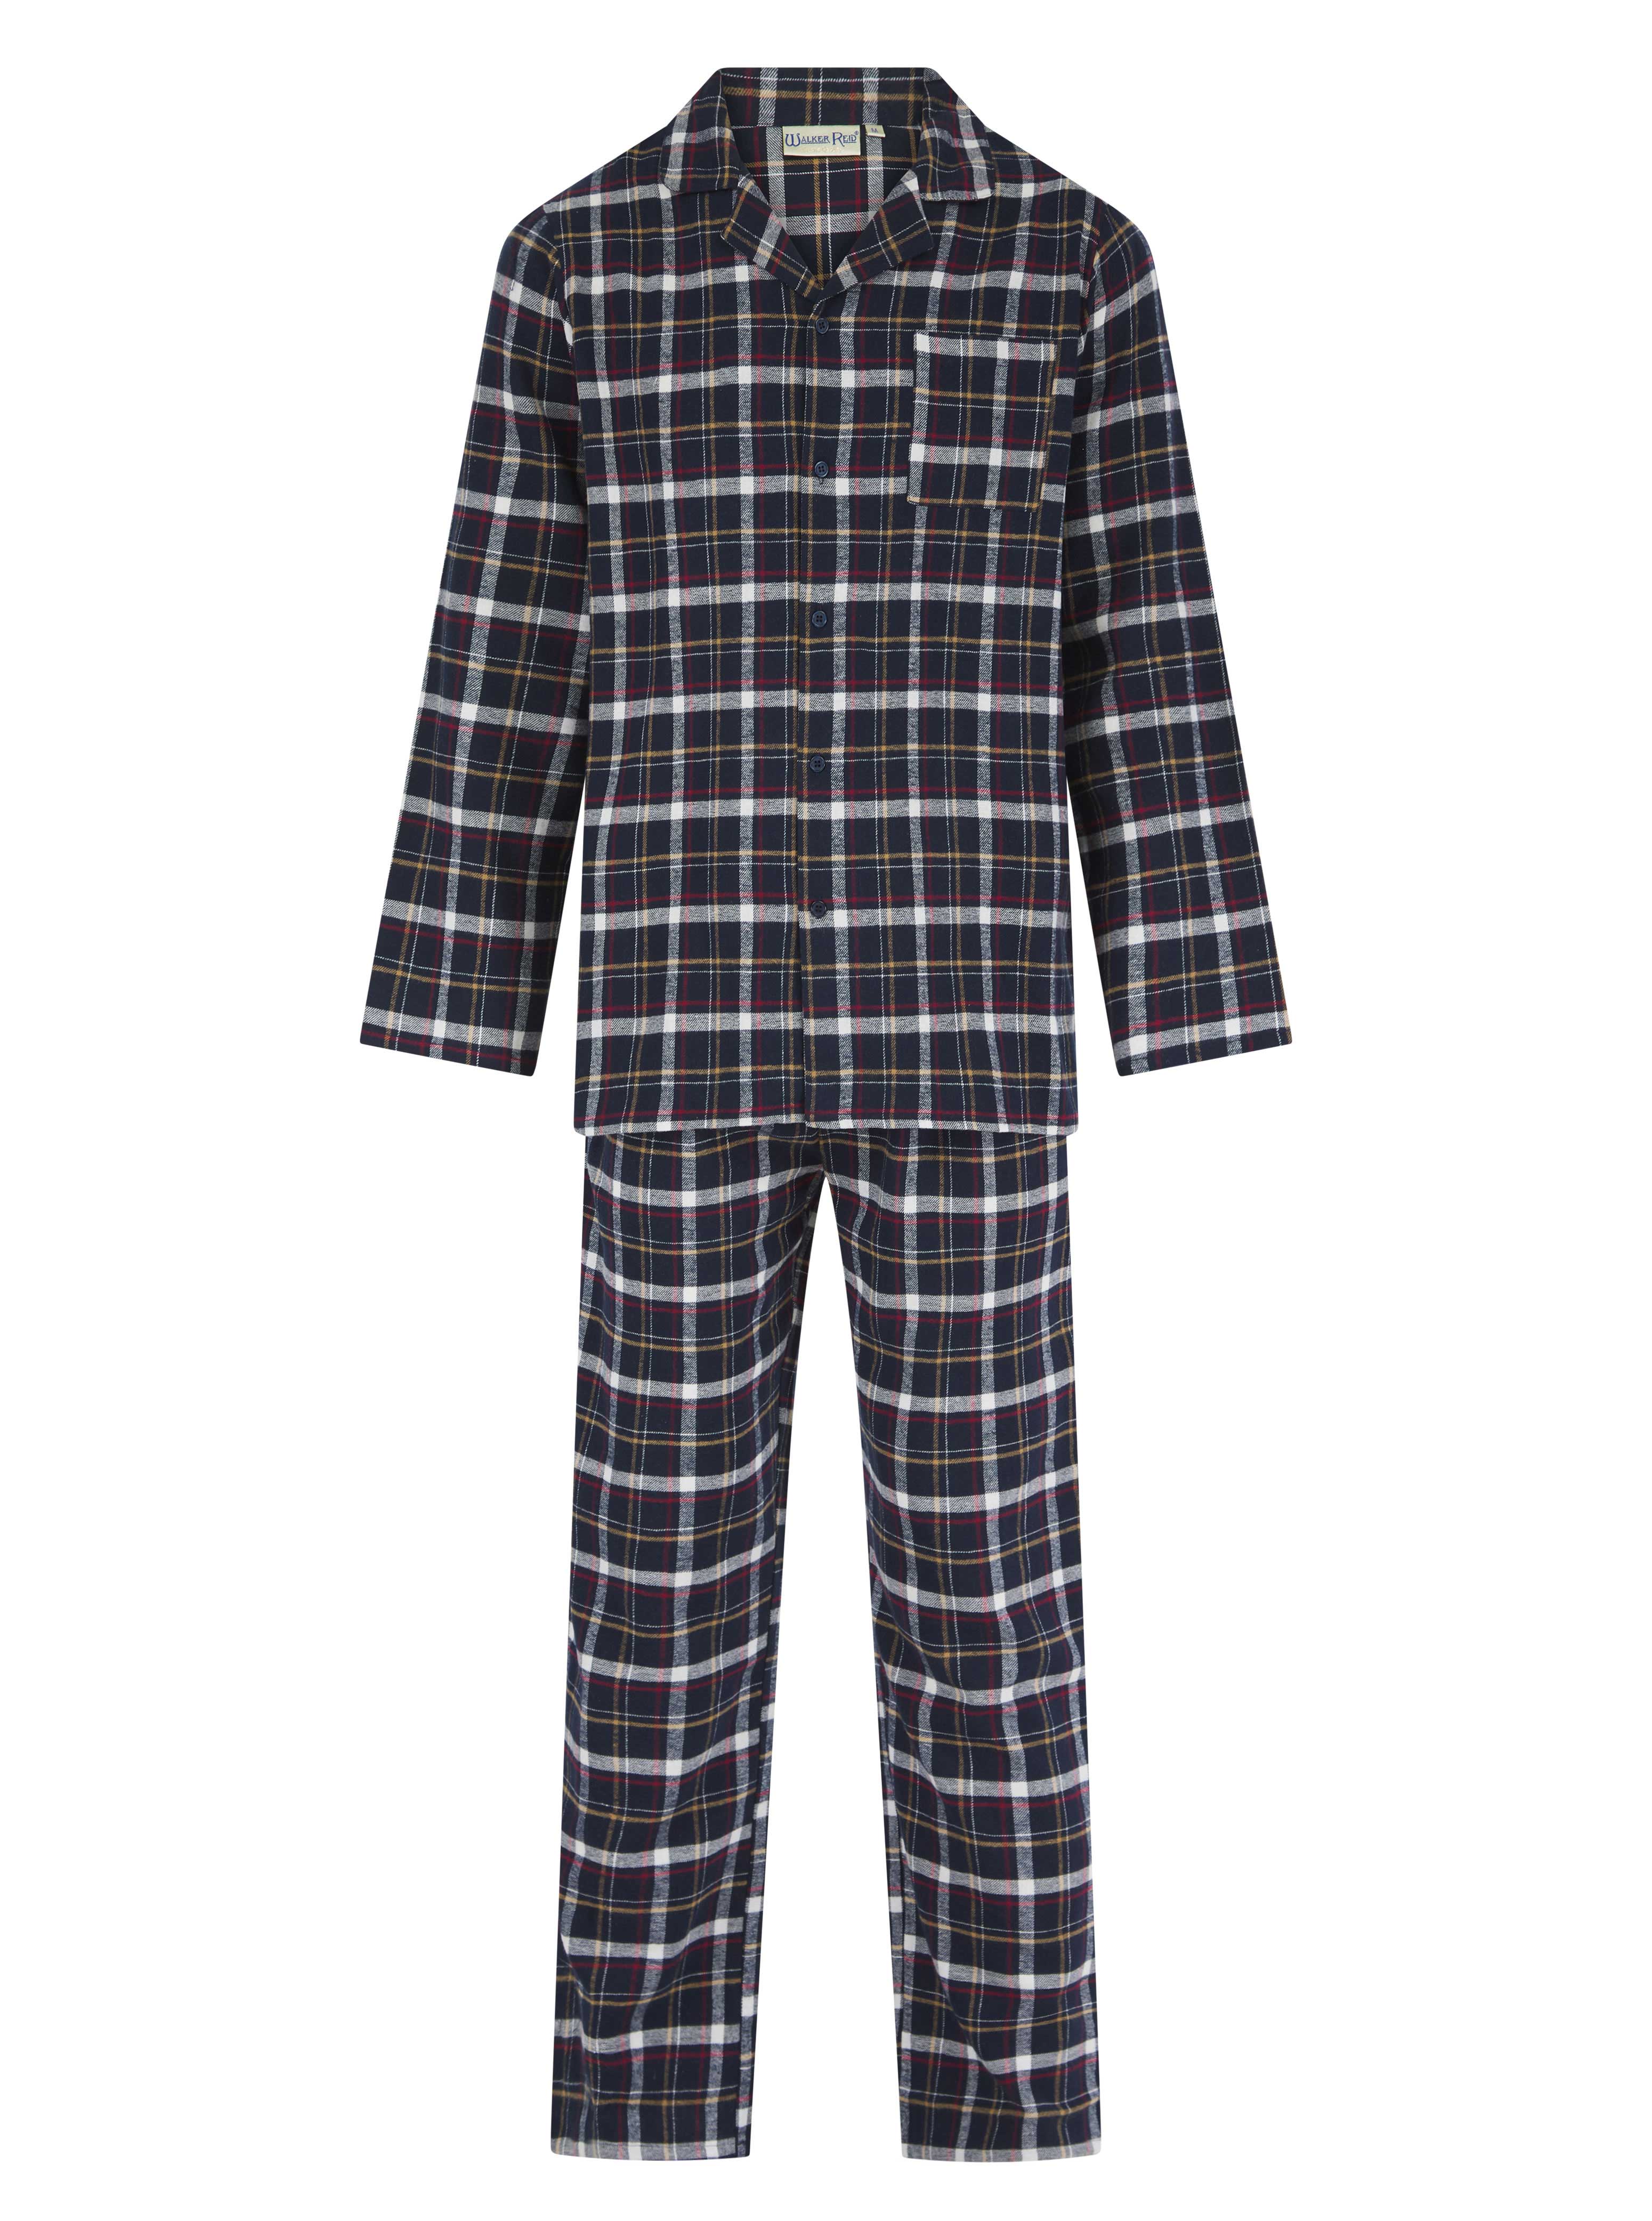 Woven Cotton Brushed Check Tailored Style Pyjama WR04806